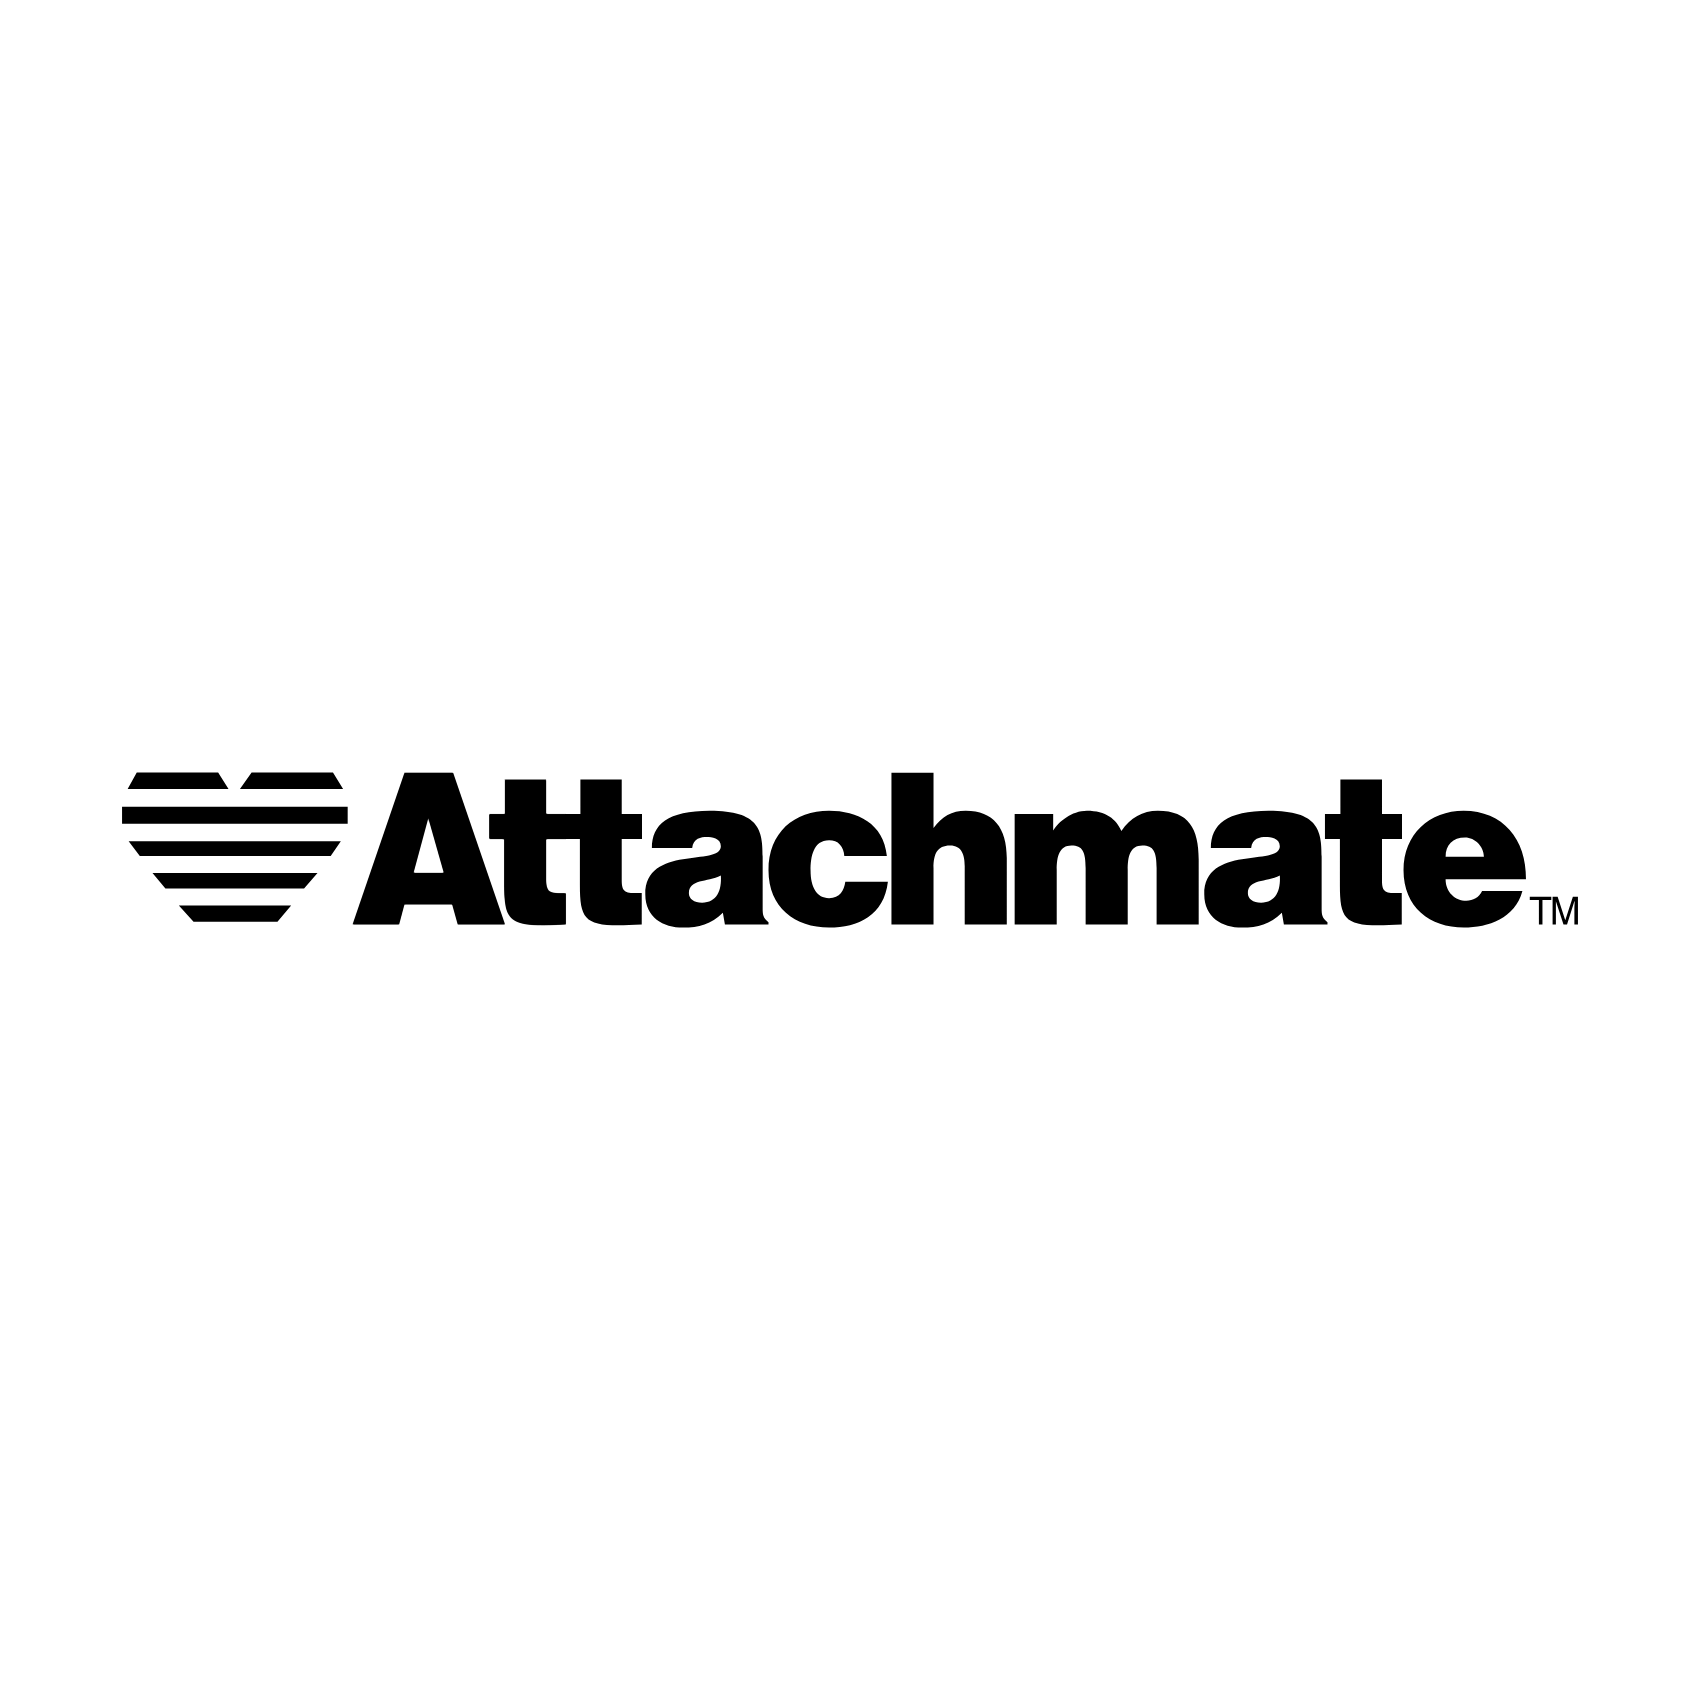 Download Attachmate Logo PNG and Vector (PDF, SVG, Ai, EPS) Free